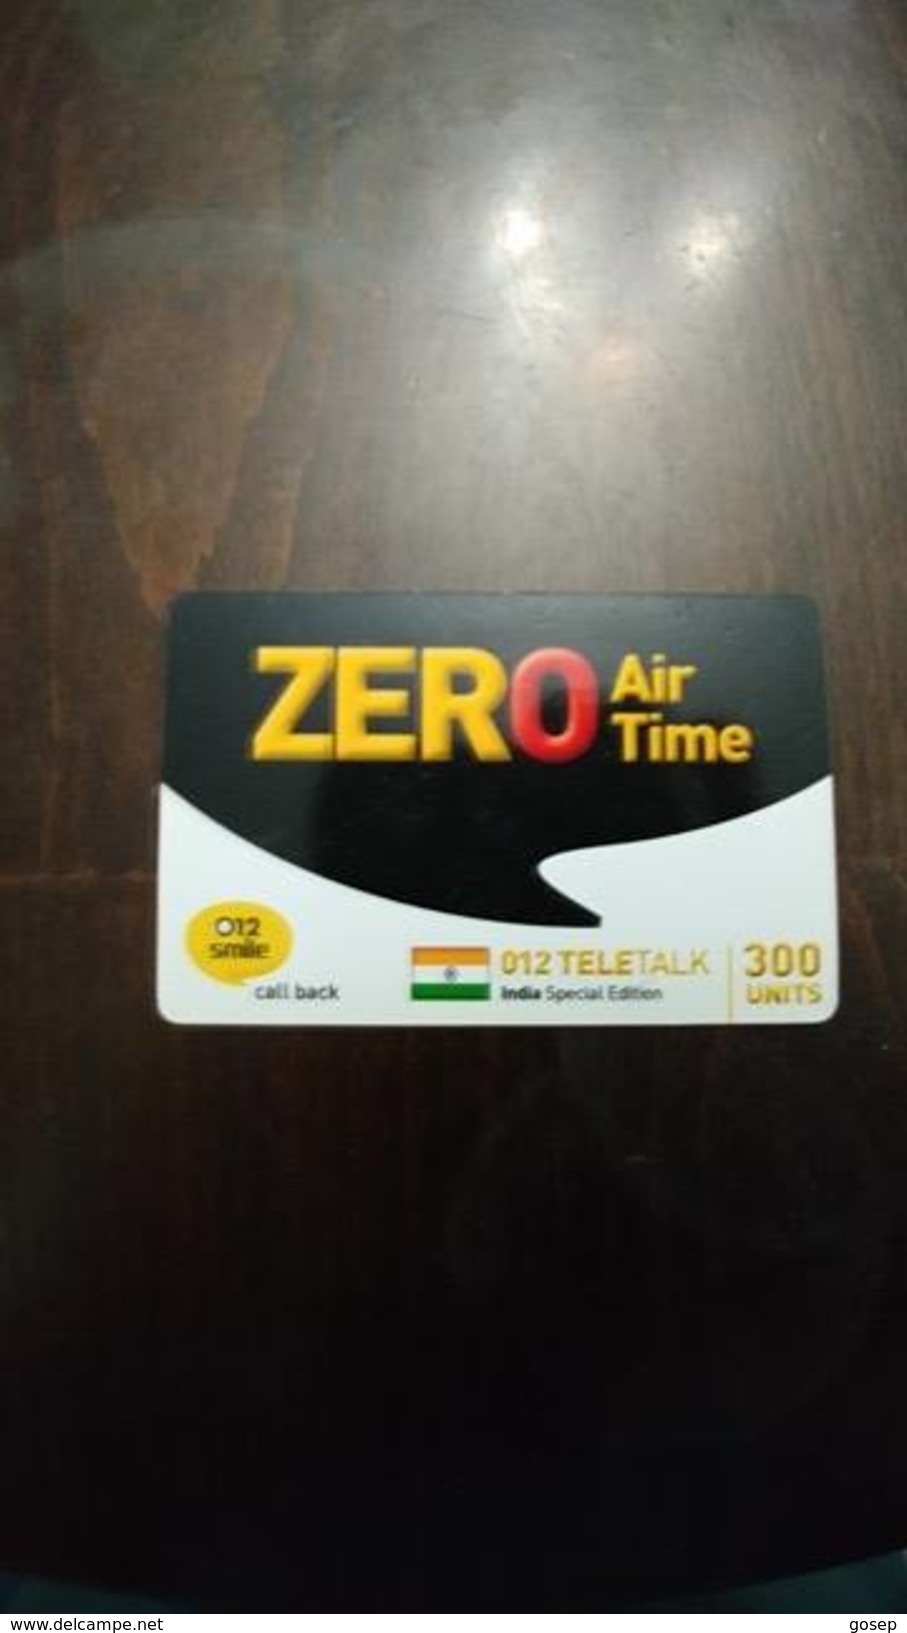 Israel-ZERO-air Time-(28)-012 Teletalk-india Special Edition-(300units)-(012smile Call Back)-out Side - Inde